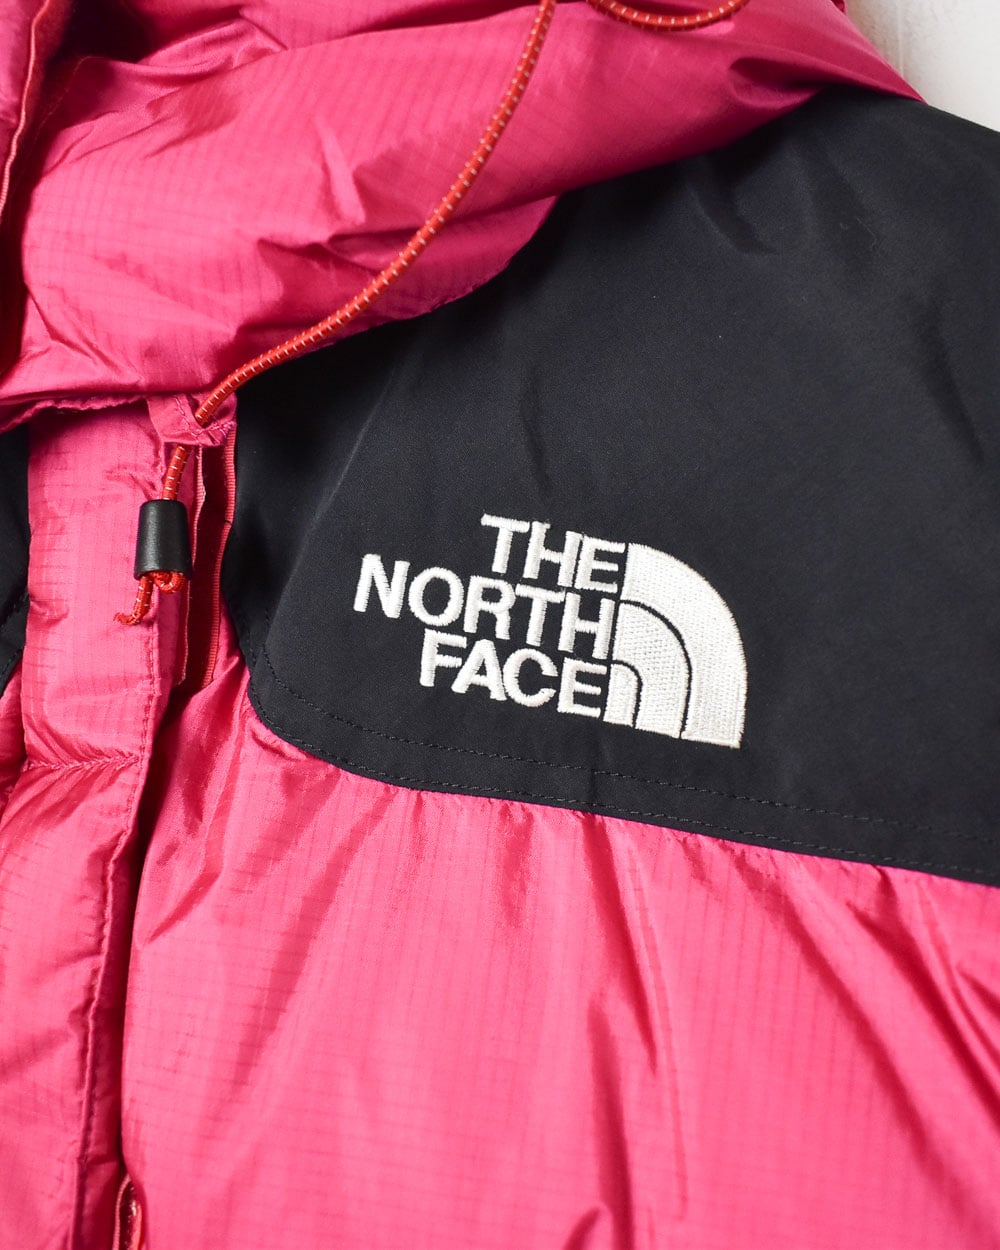 Pink The North Face Hooded Summit Series Windstopper 700 Down Puffer Jacket - Large Women's